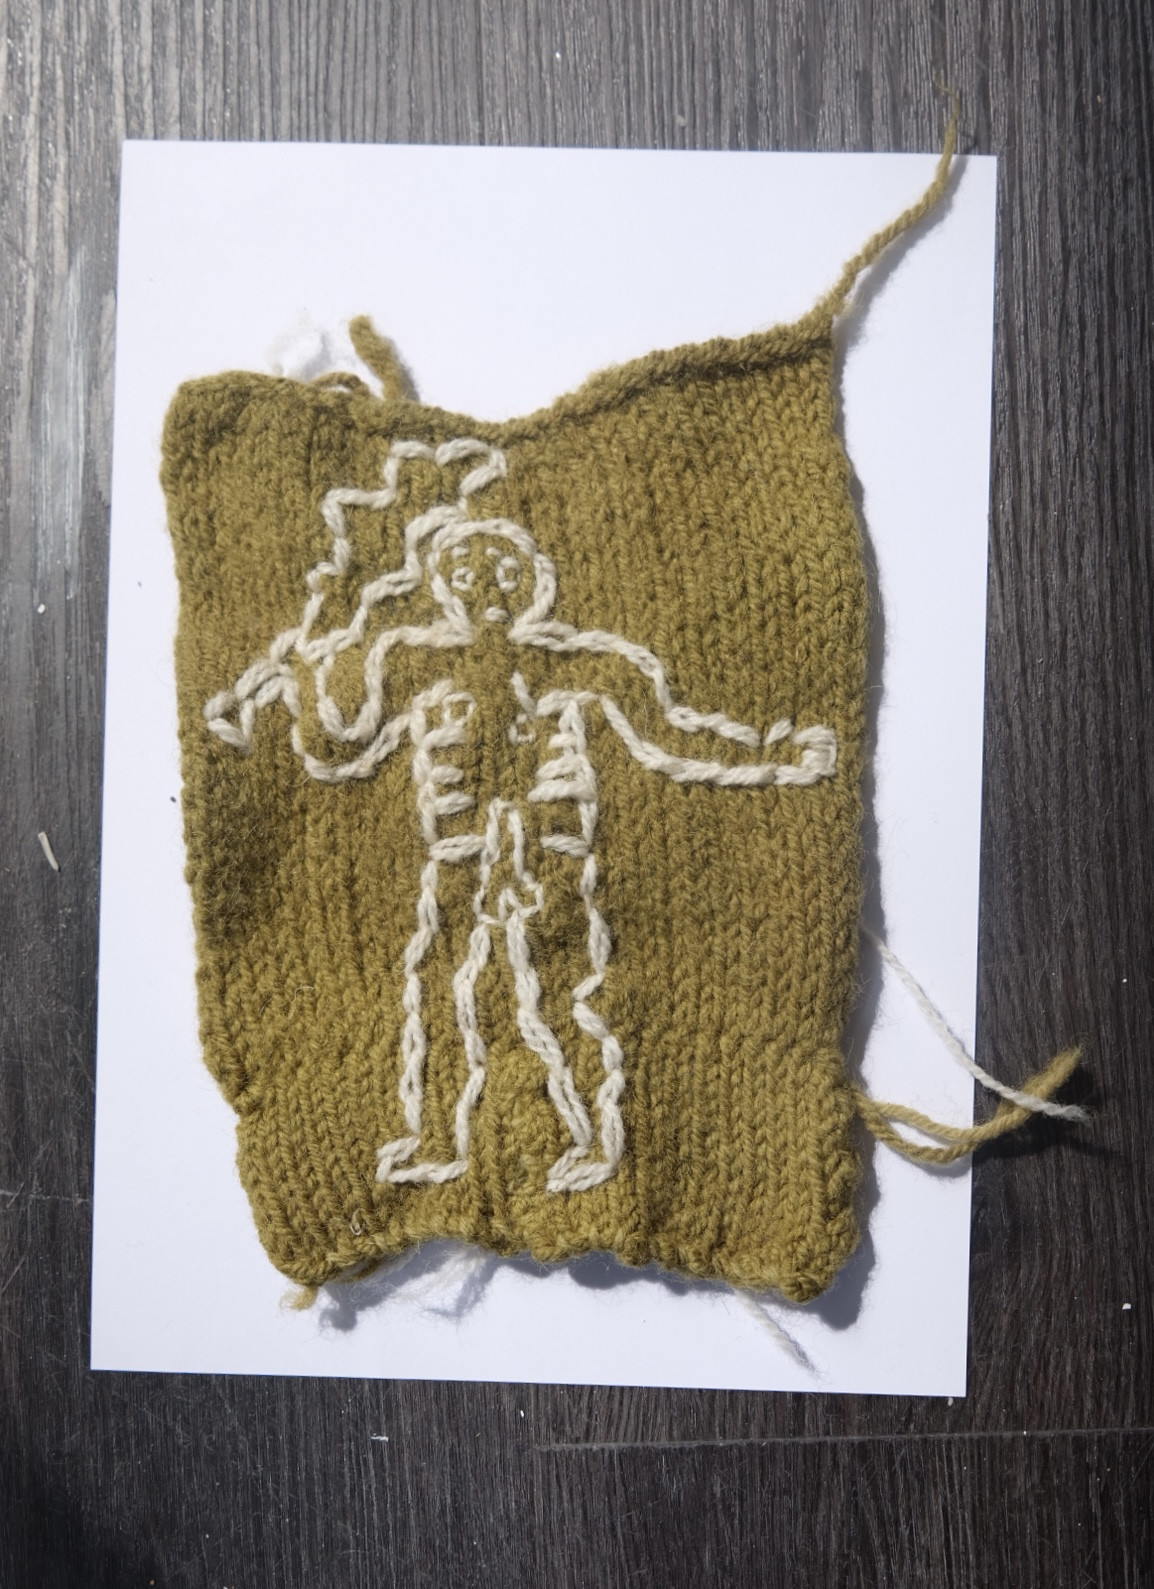 *Cerne Abbas chalk giant*, hand knitted in heritage wools, dyed with onion and iron